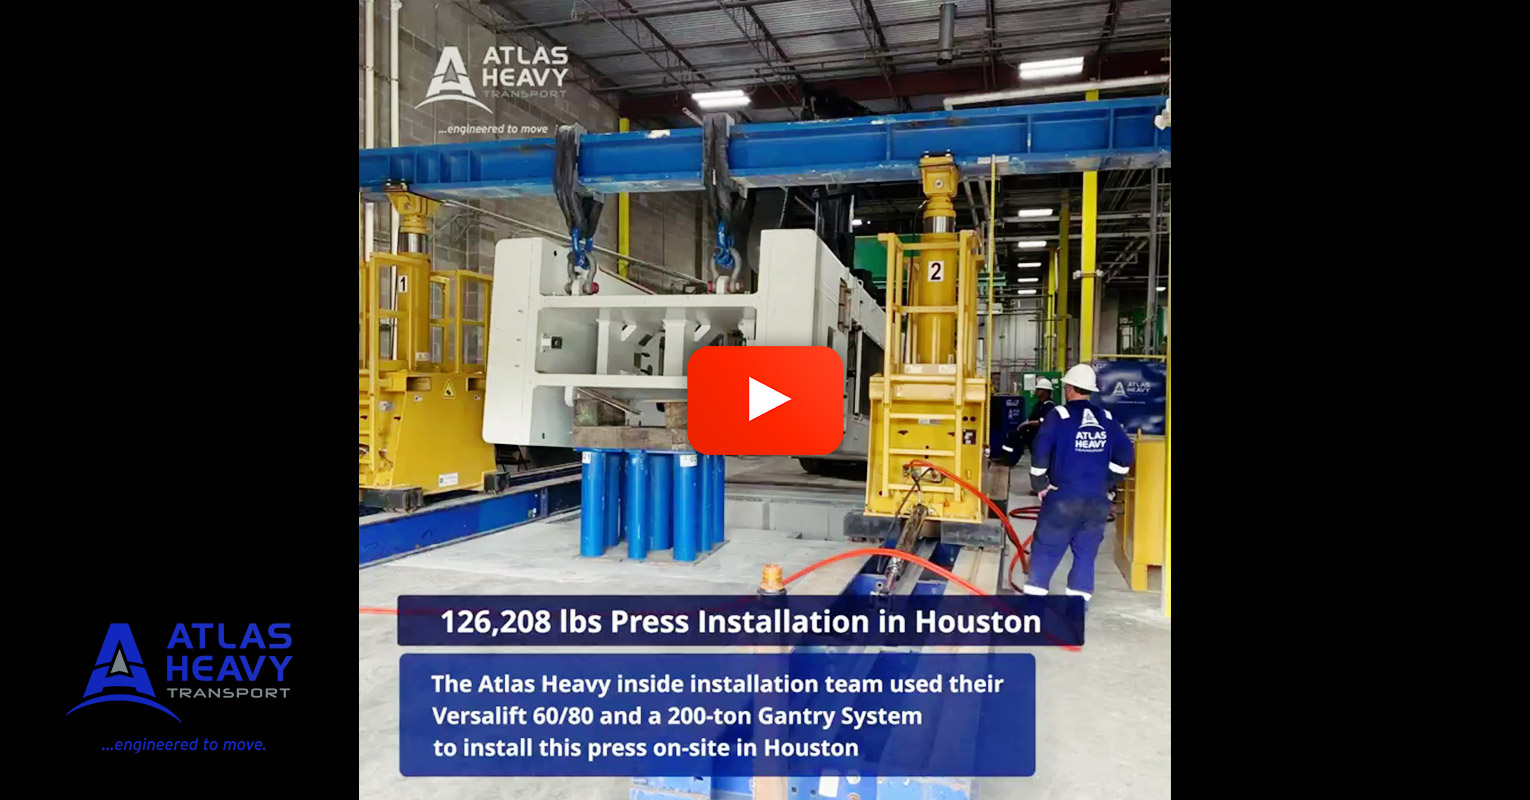 Video - Atlas Heavy Transport Handled the Installation of a 126,208 lbs Press in Houston